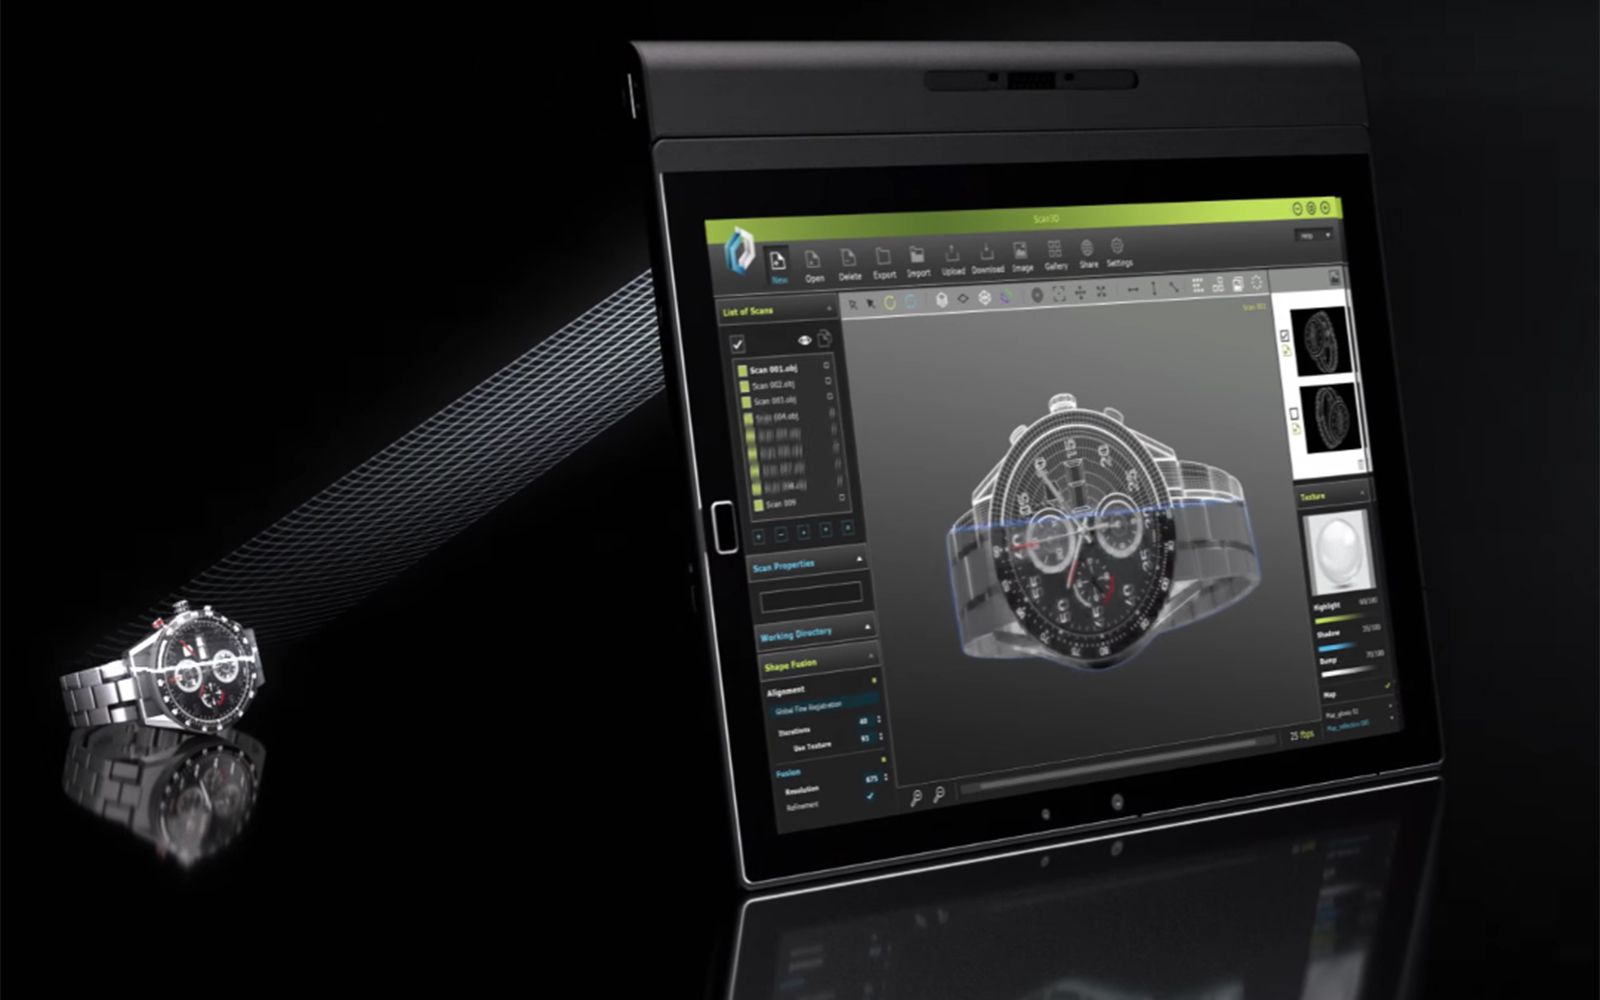 lenovo makes modular thinkpad x1 tablet add on battery projector 3d scanner and more image 1